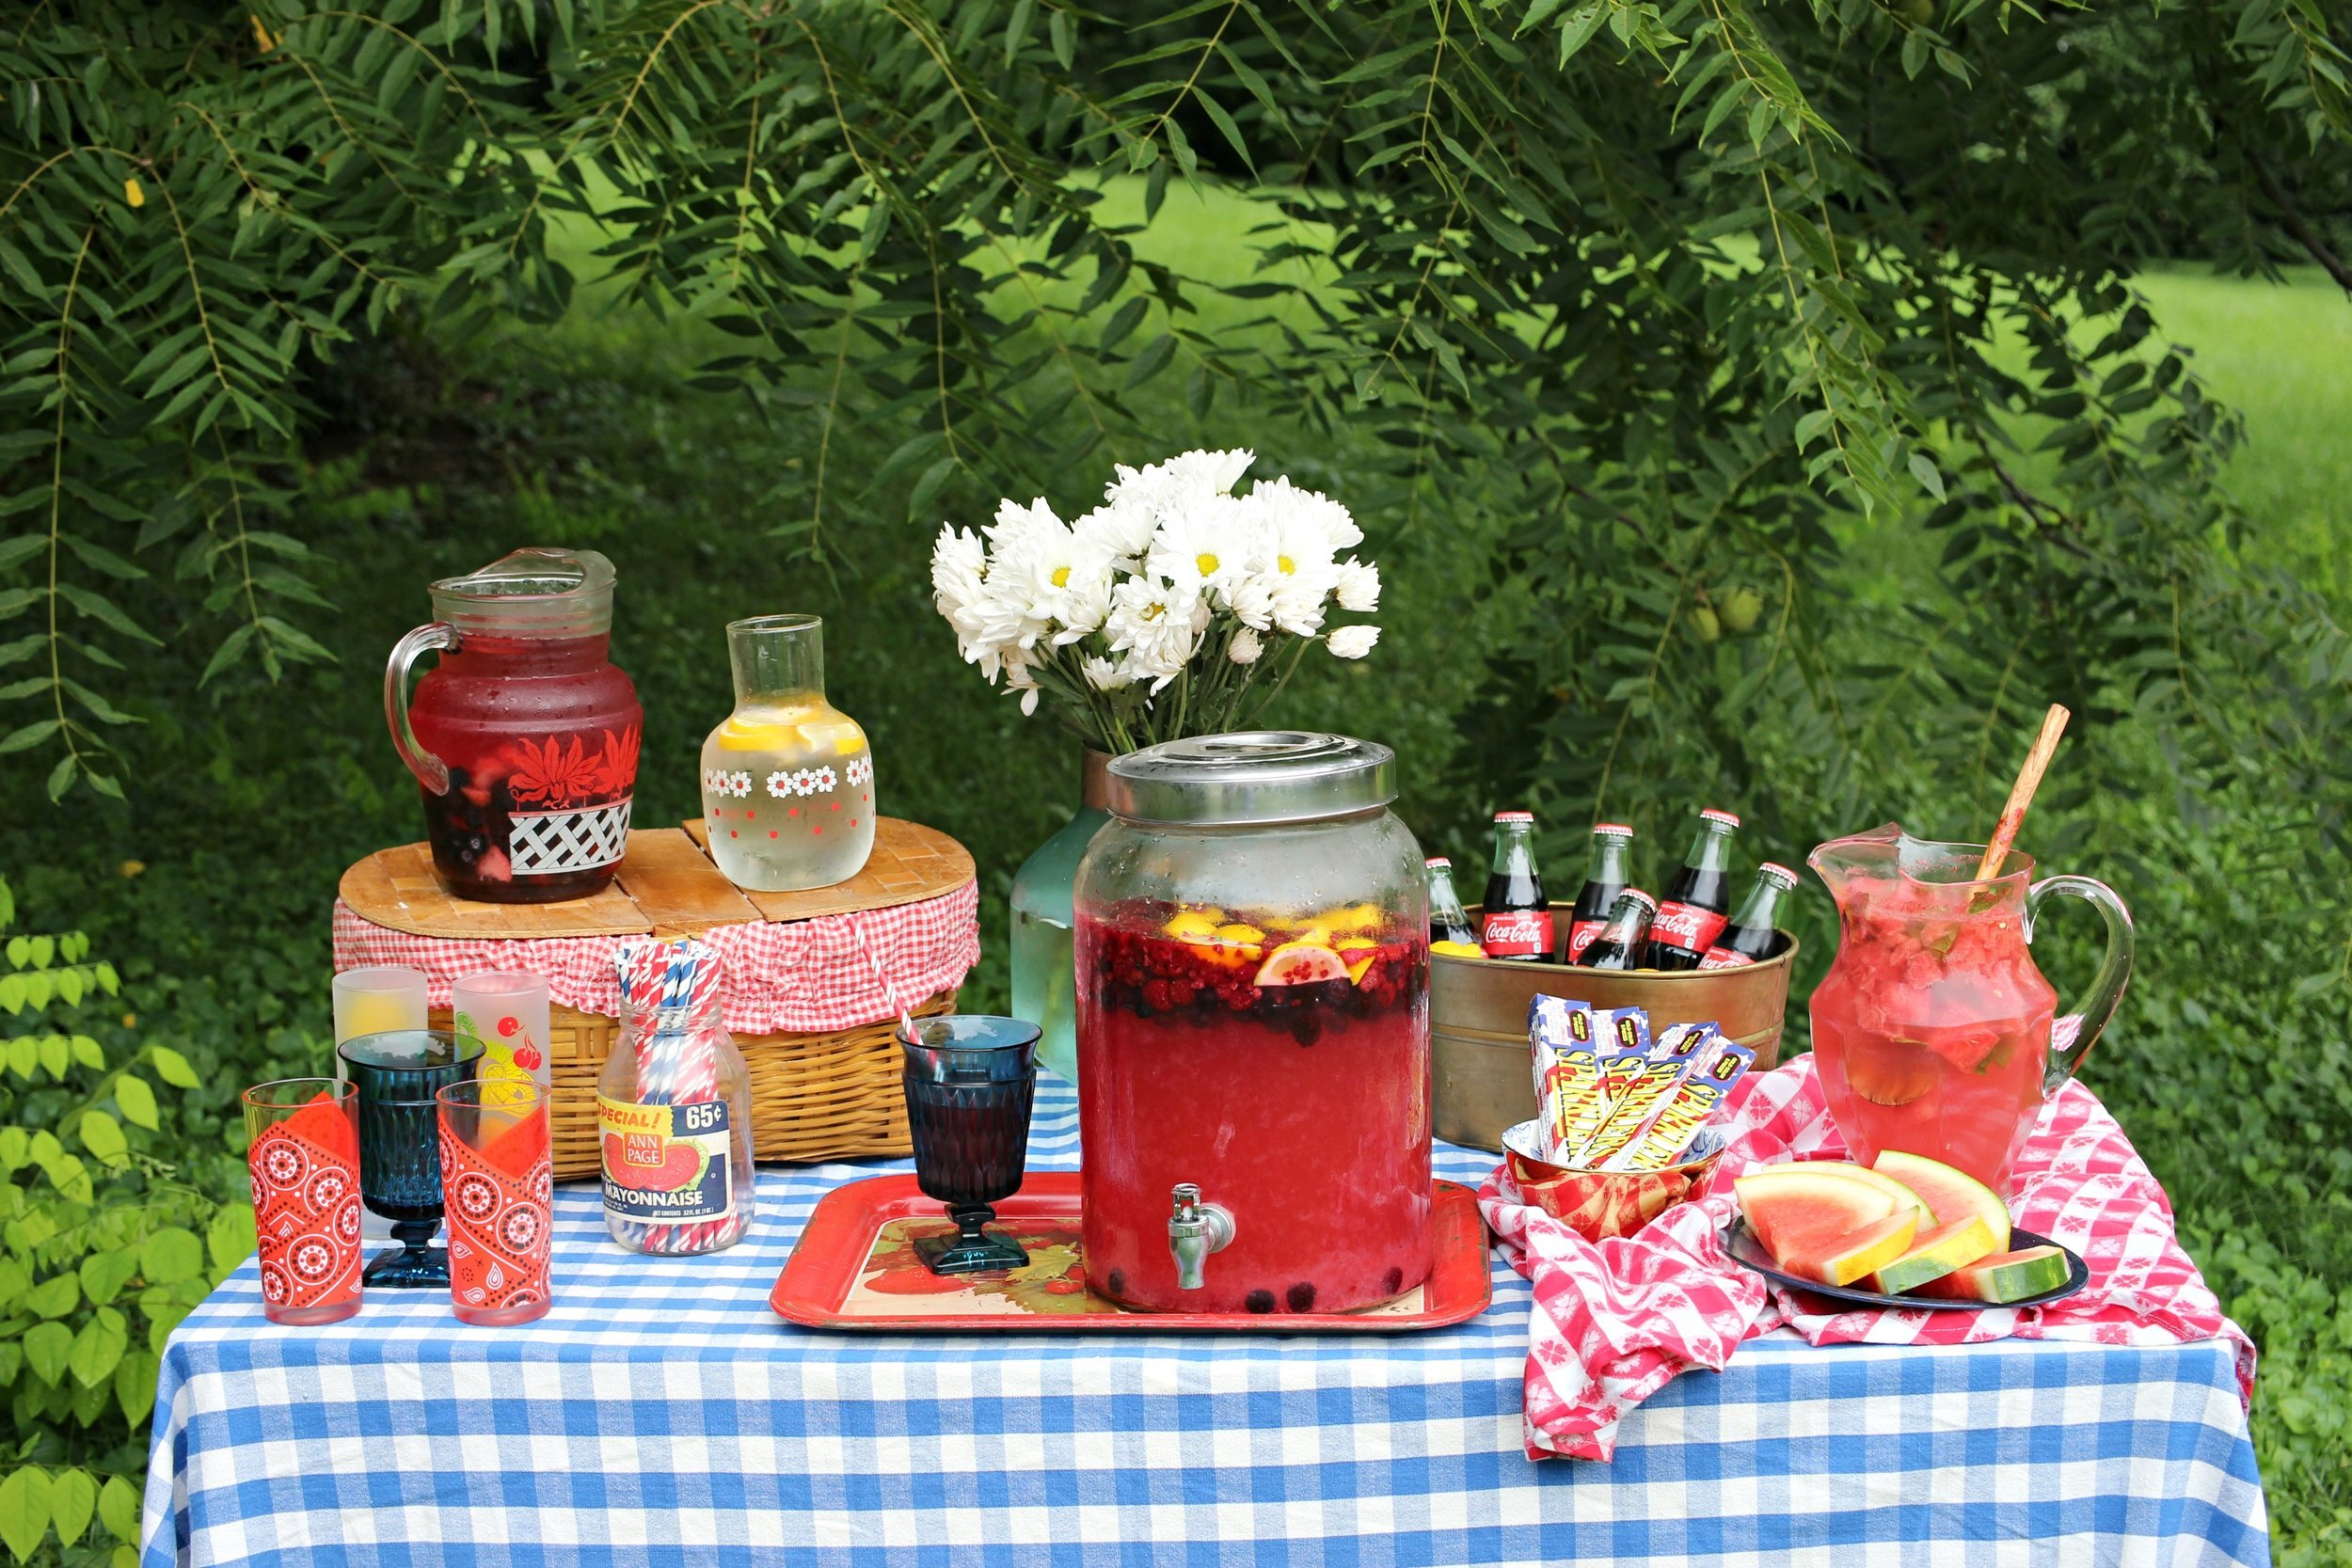 Summer Entertaining: My Go To Refreshing Drinks for Beverage Dispensers  (Ep. 1 of 4) 